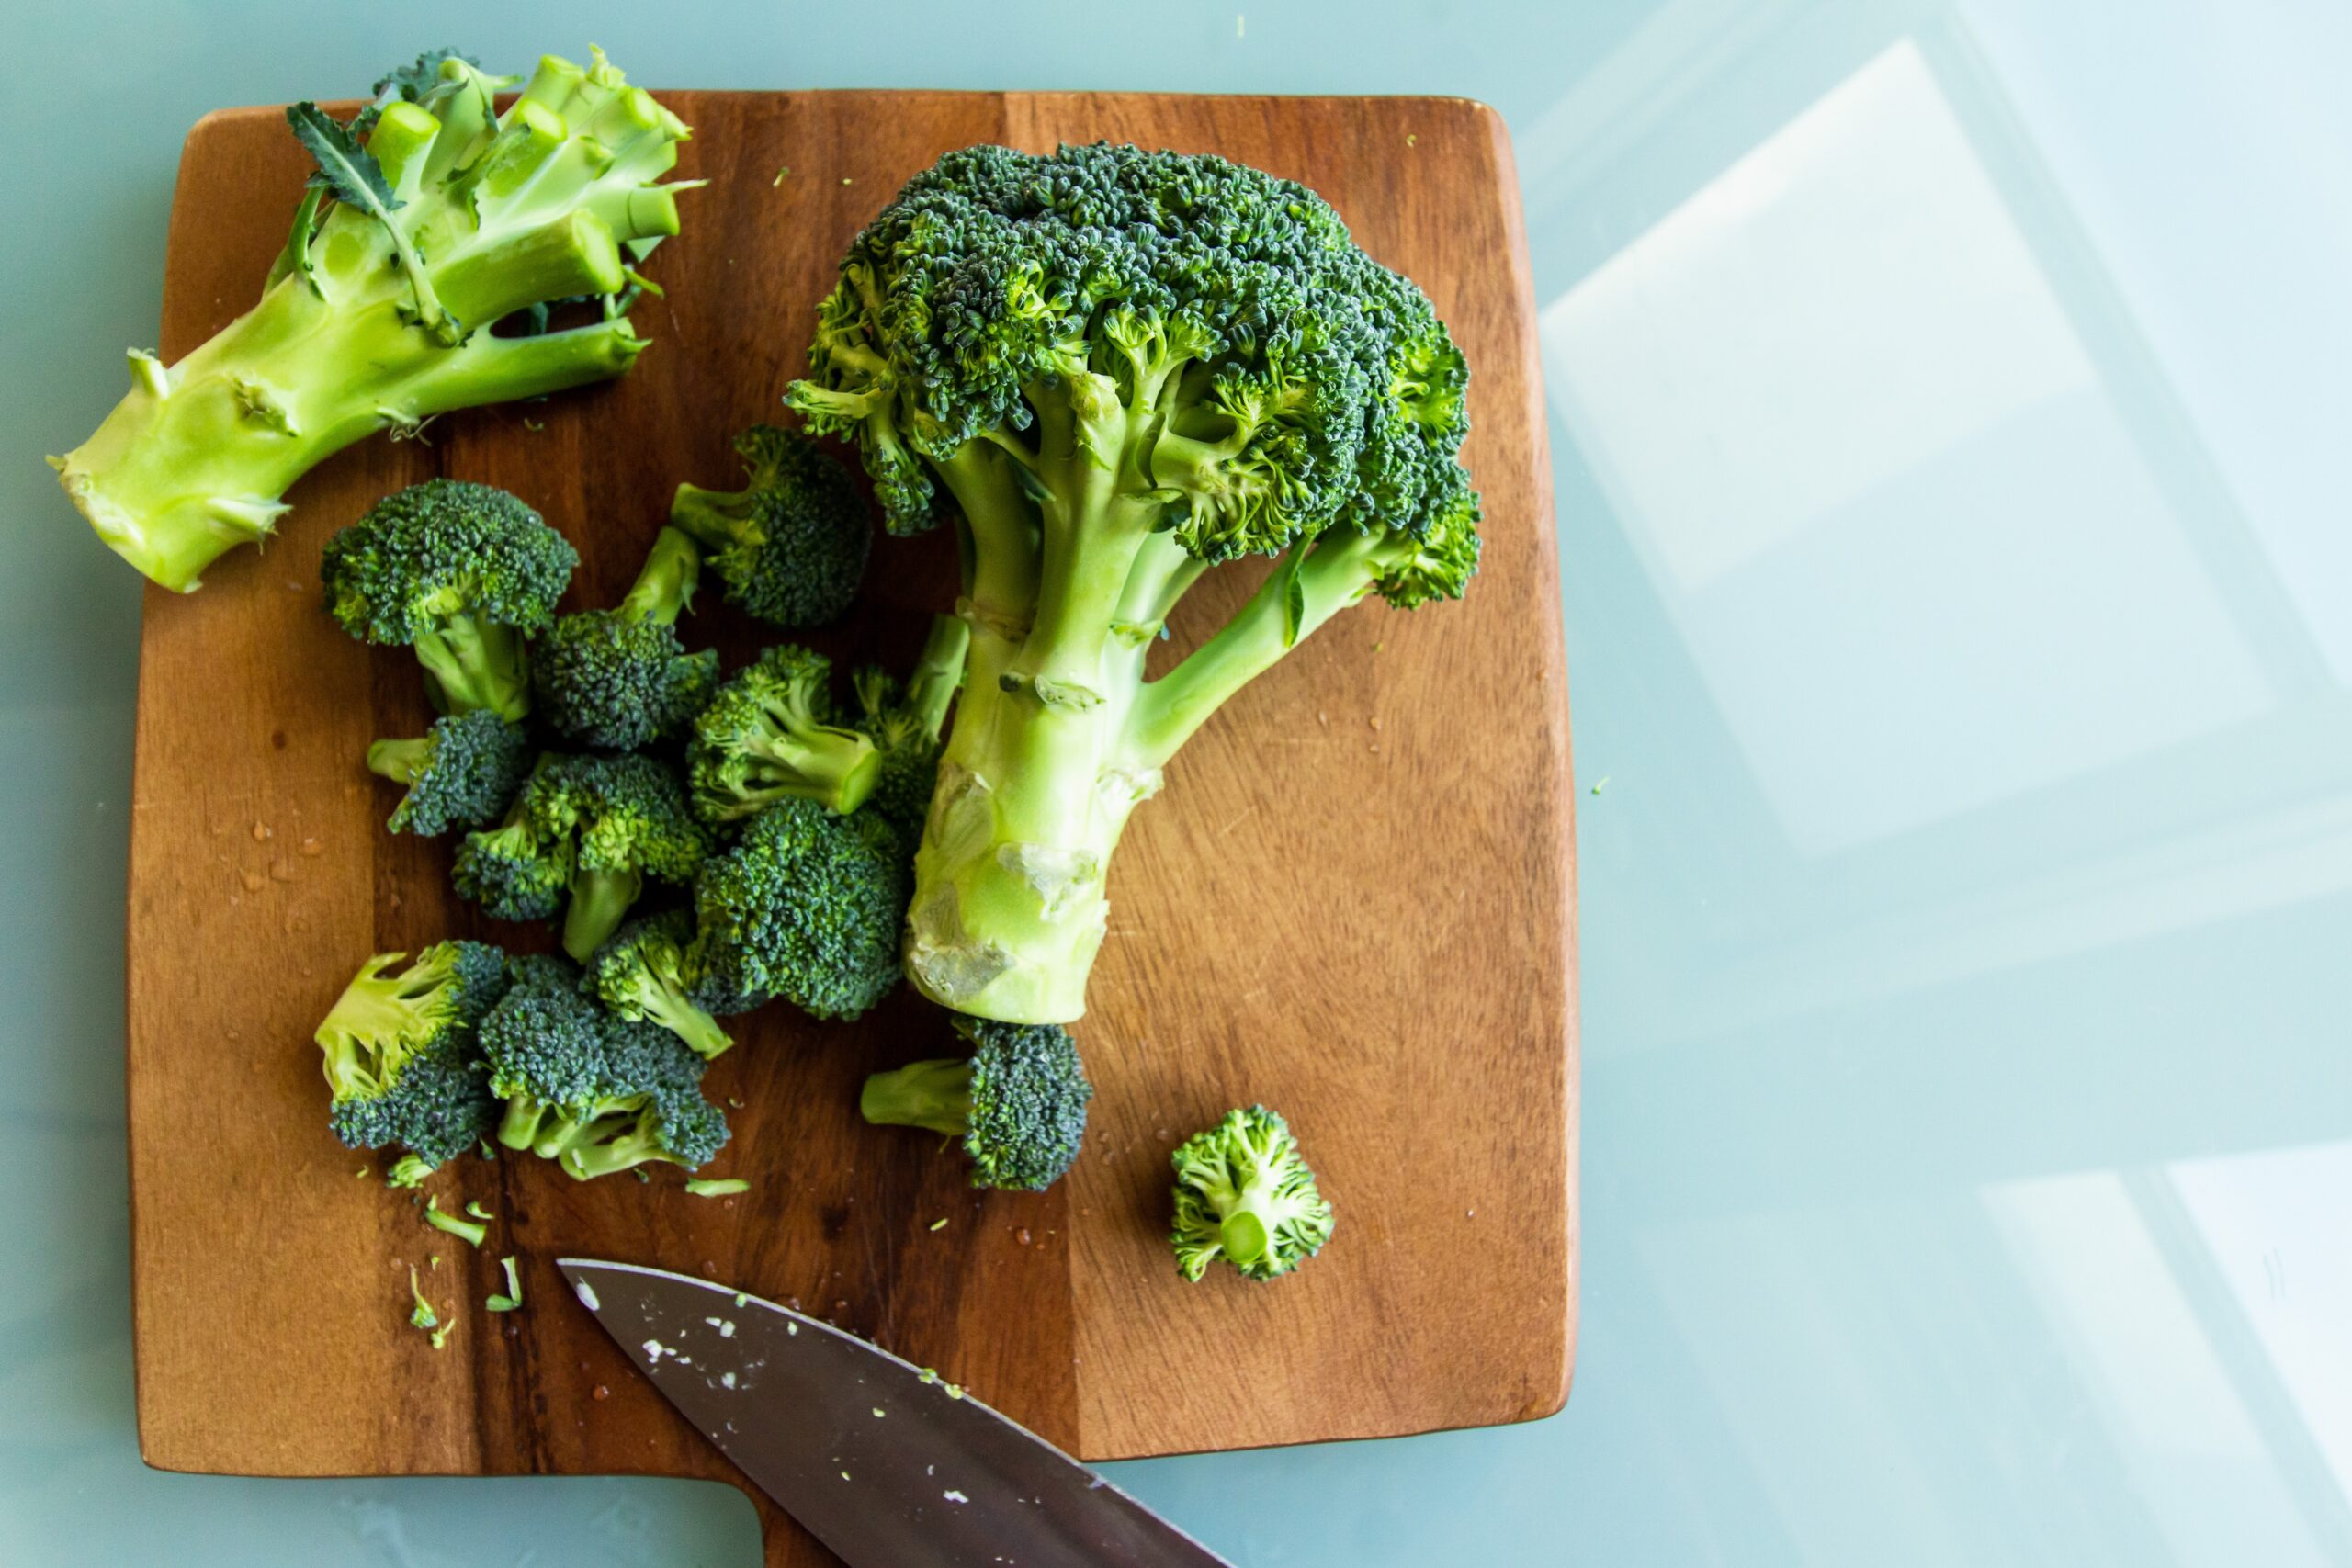 Vitamin K: What Is, Deficiency, Food Sources, and Dosage